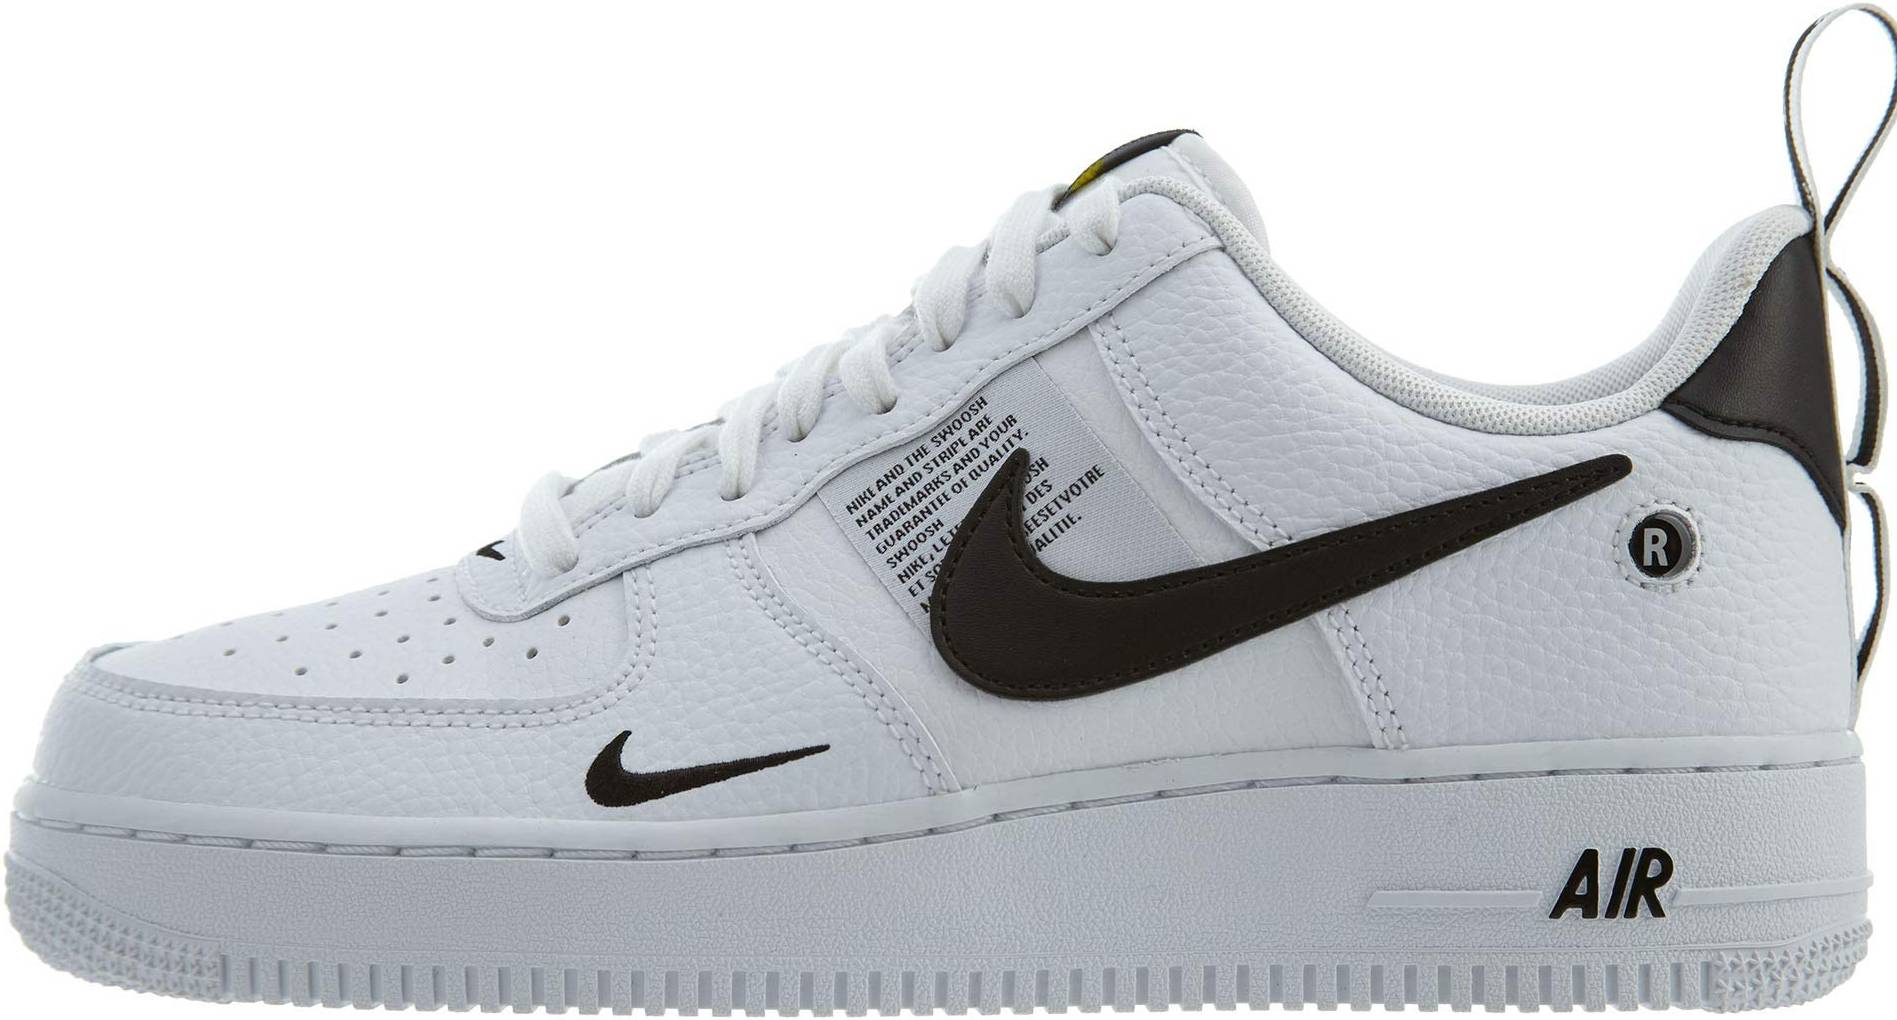 Hollow idiom Daytime Nike Air Force 1 07 LV8 Utility sneakers in 5 colors (only $89) | RunRepeat